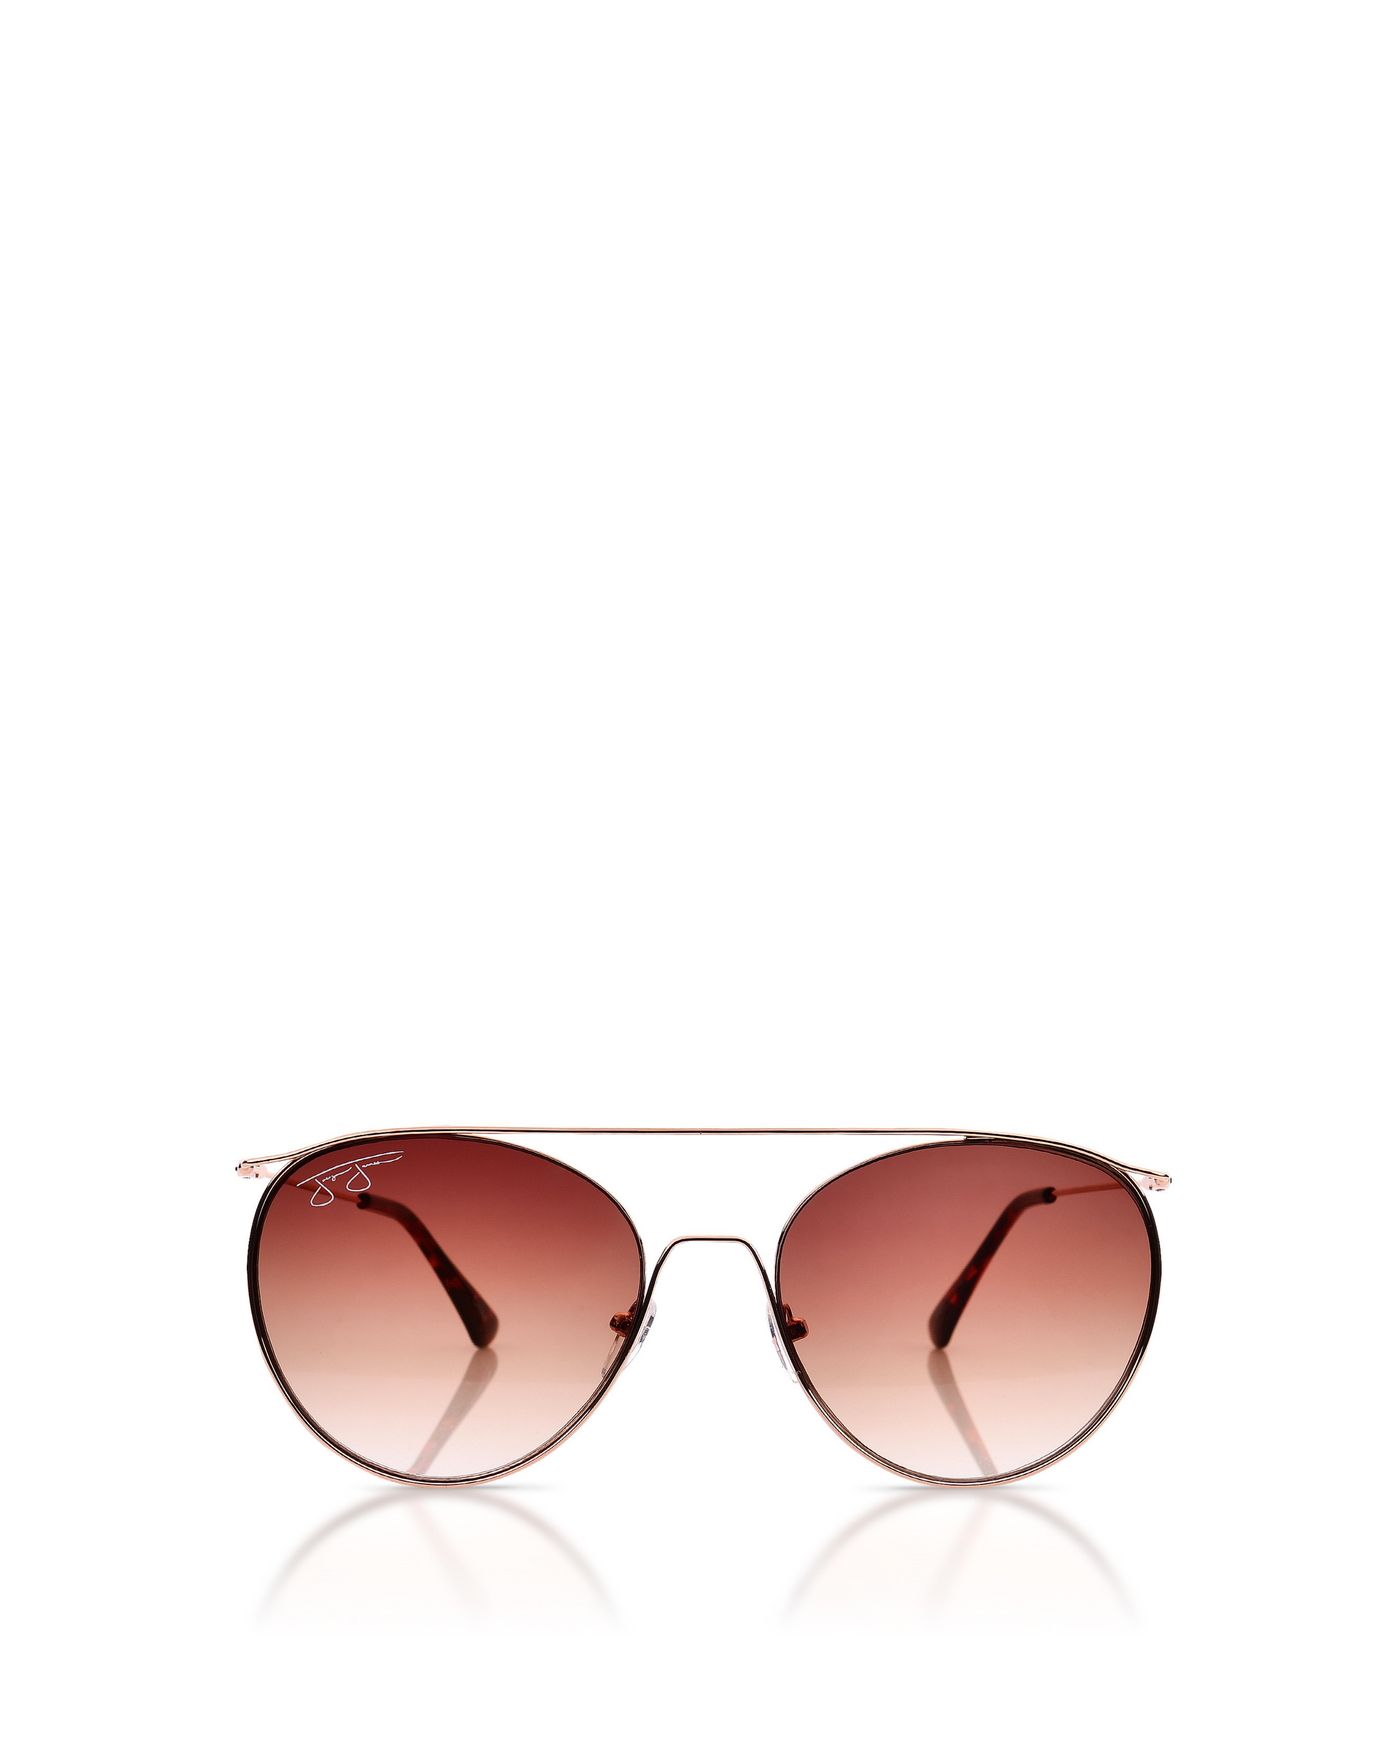 Round Aviator with Thin Crossbar Sunglasses - Gold Metal Frame with Brown Lens Sunglasses Joey James, The Label   